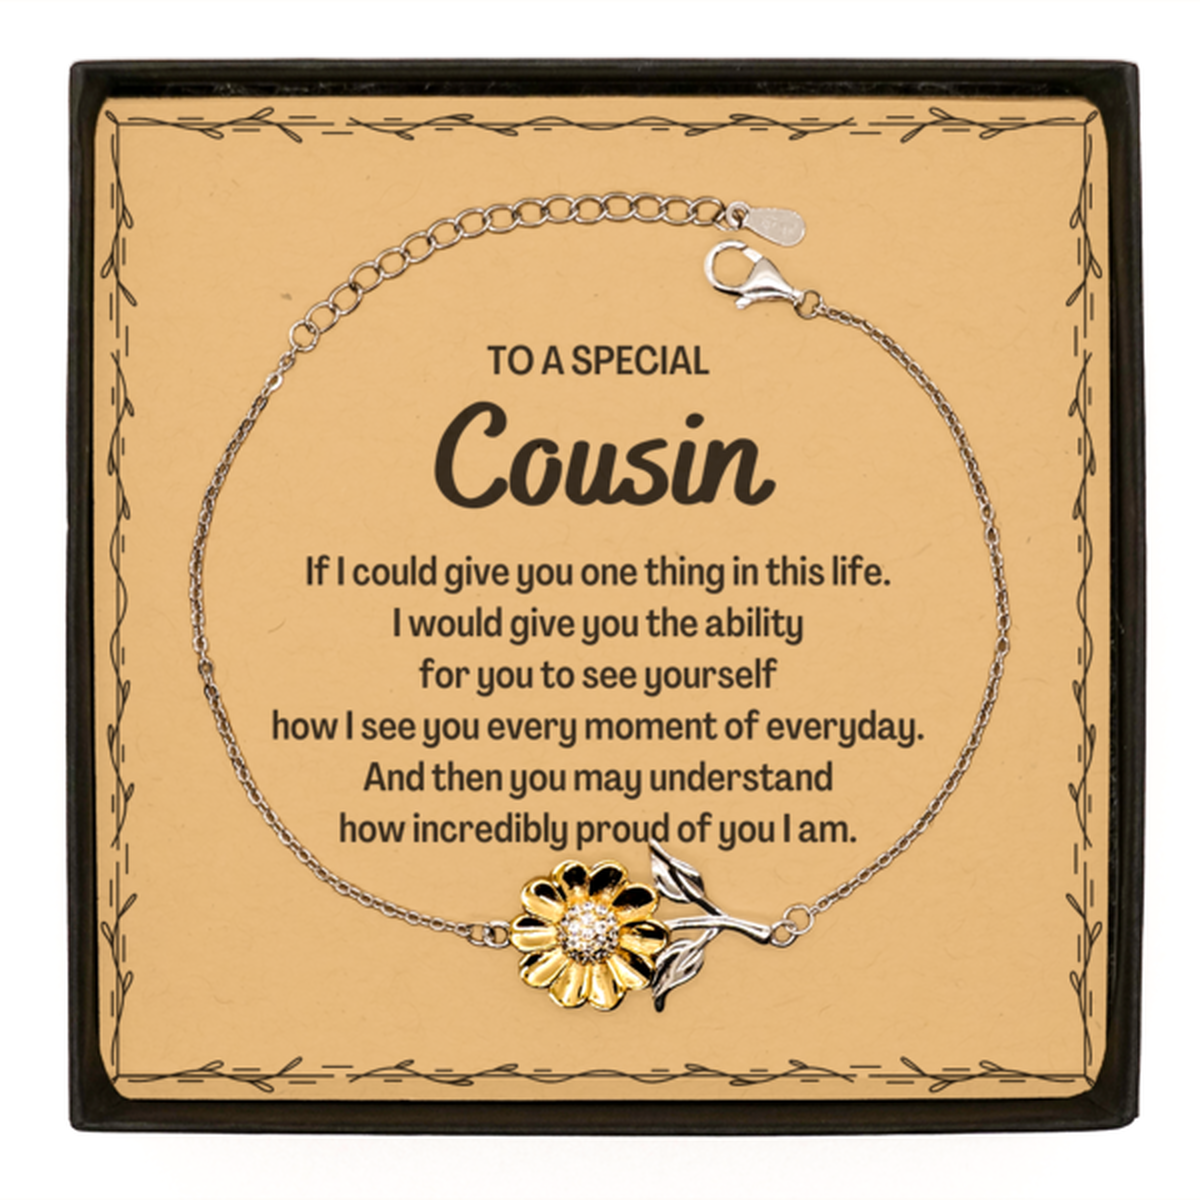 To My Cousin Sunflower Bracelet, Gifts For Cousin Message Card, Inspirational Gifts for Christmas Birthday, Epic Gifts for Cousin To A Special Cousin how incredibly proud of you I am